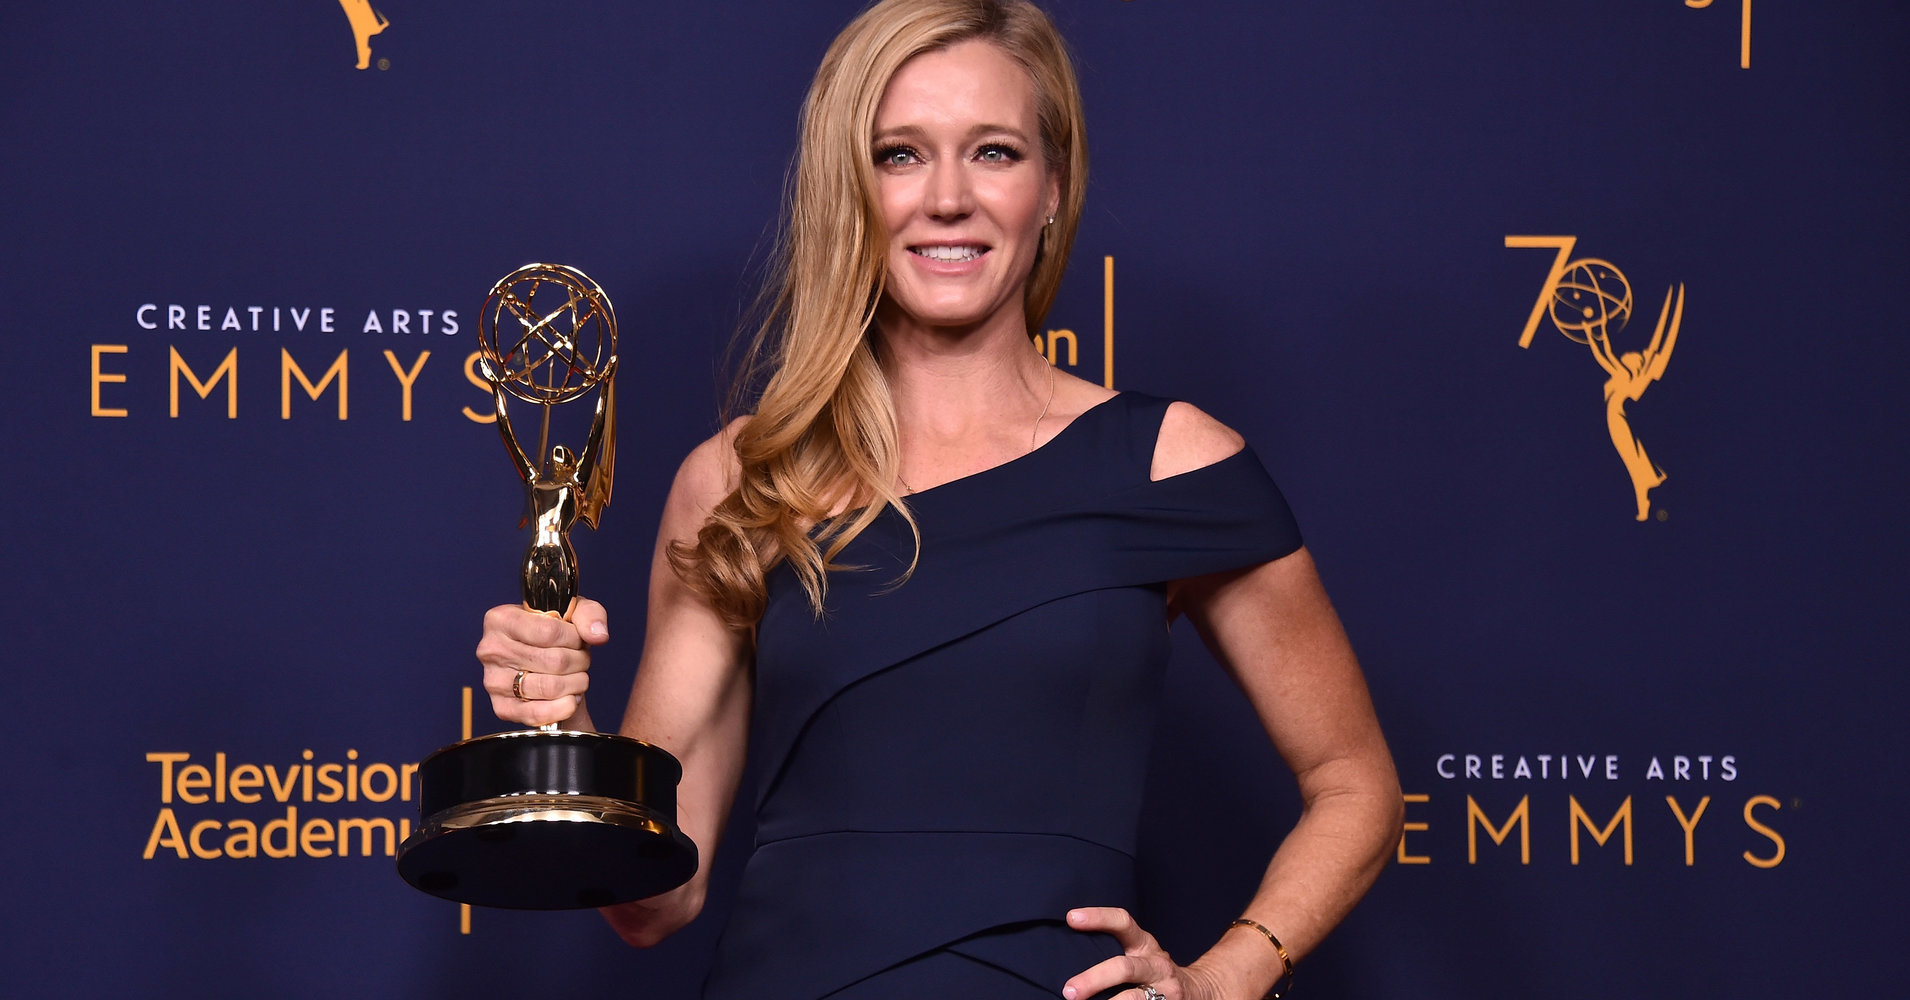 LOS ANGELES, CA - SEPTEMBER 08:  Shauna Duggins poses in the press room at the 2018 Creative Arts Emmy Awards at Microsoft Theater on September 8, 2018 in Los Angeles, California.  (Photo by Alberto E. Rodriguez/Getty Images)